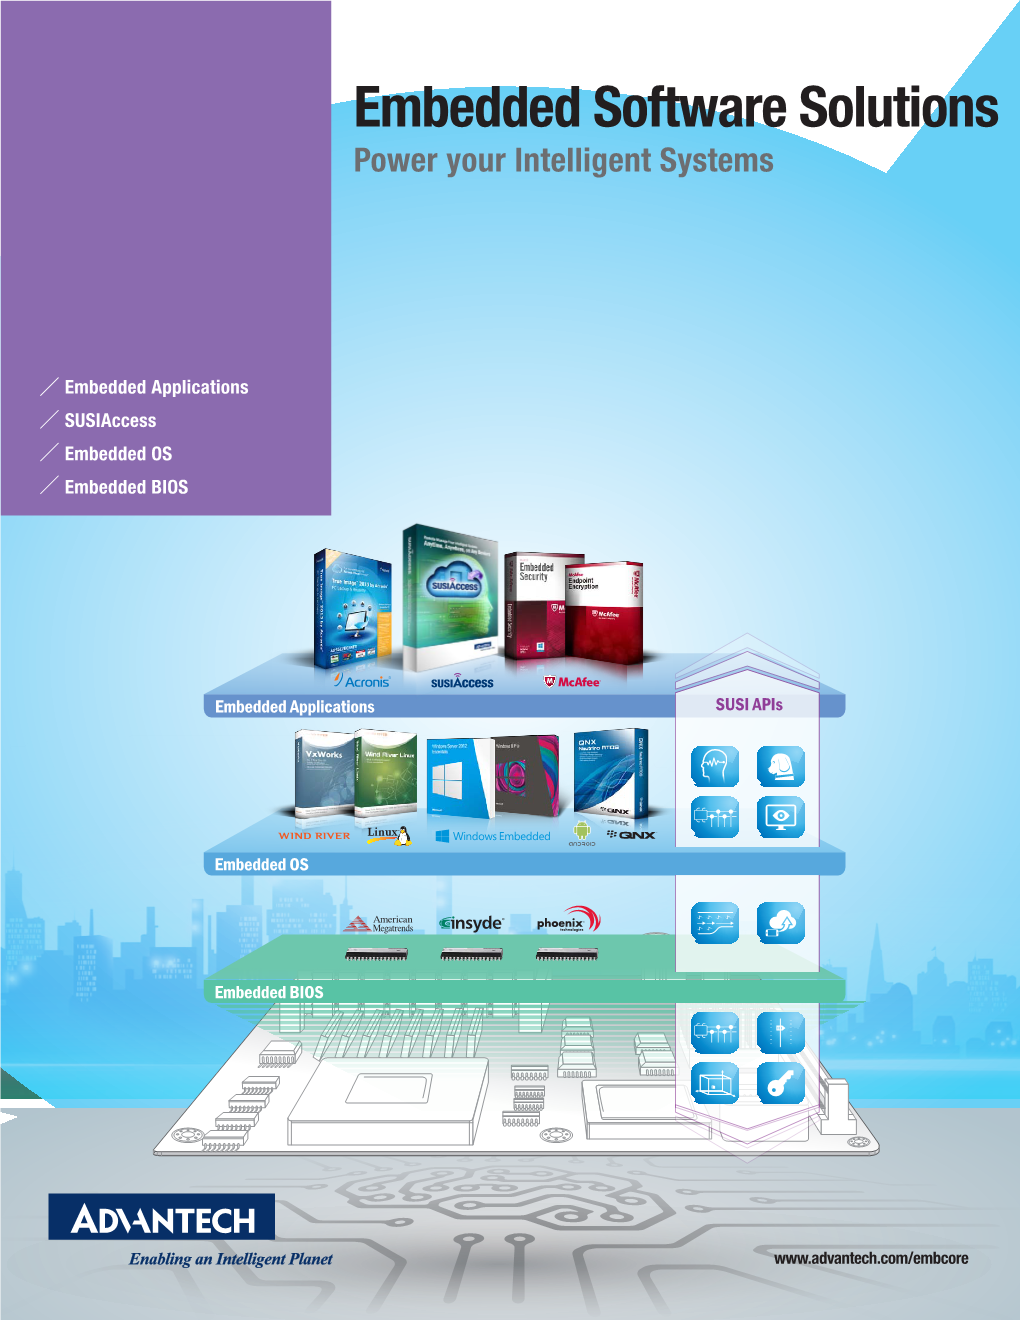 Embedded Software Solutions Power Your Intelligent Systems